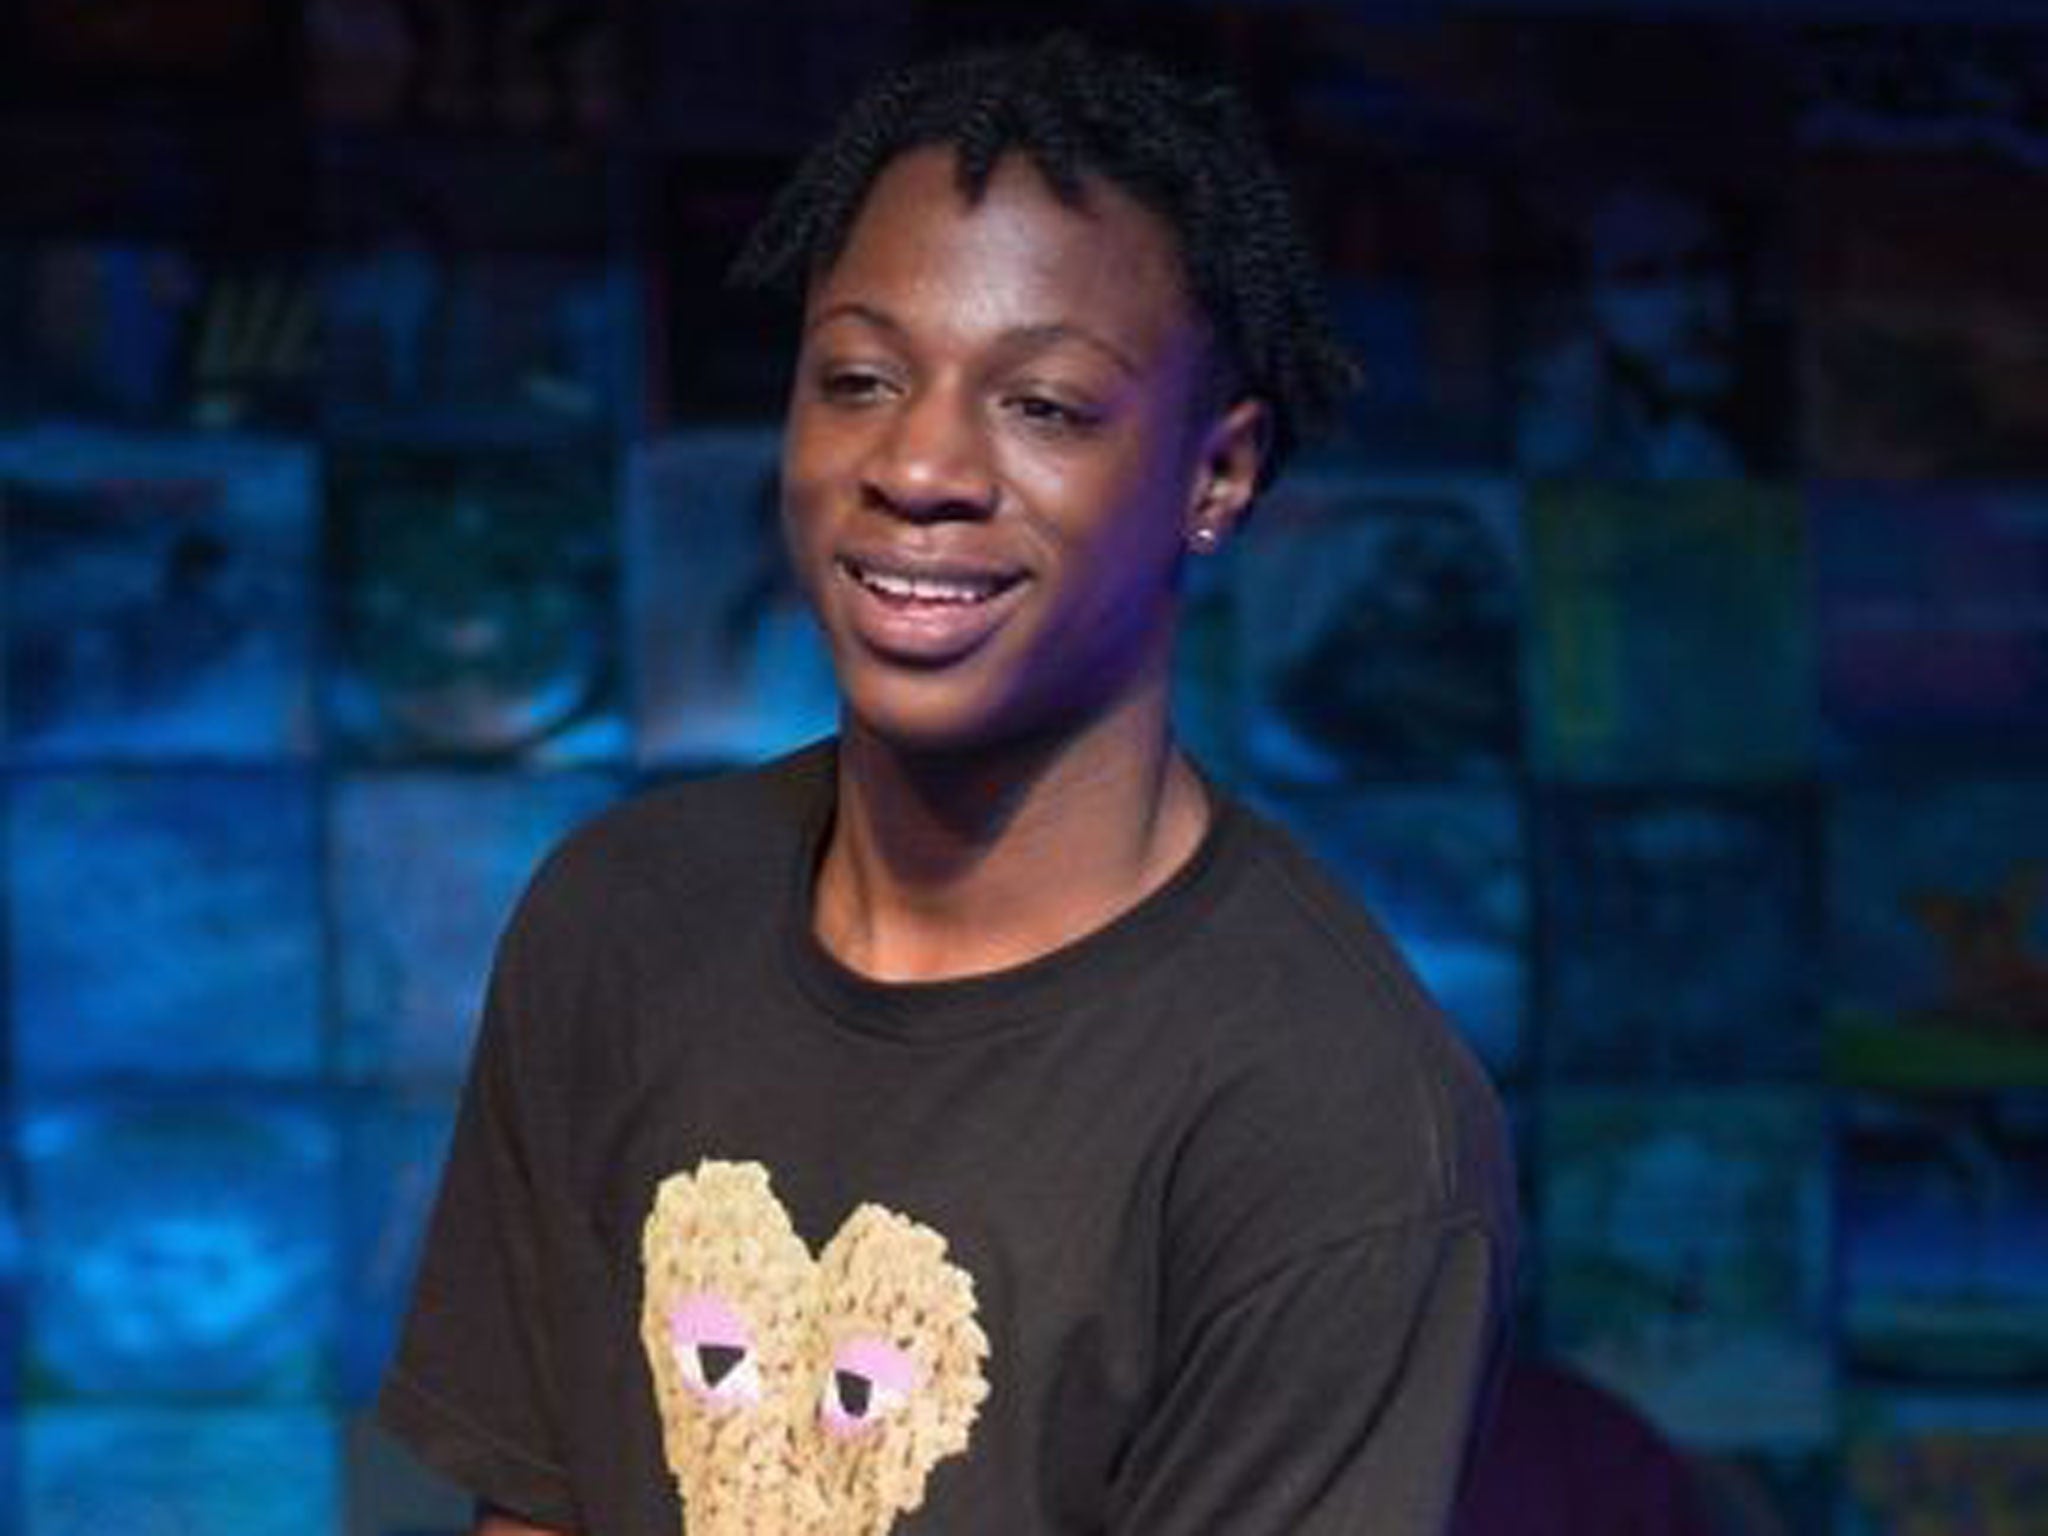 Joey Bada$$ said he was looking at the eclipse without protective glasses